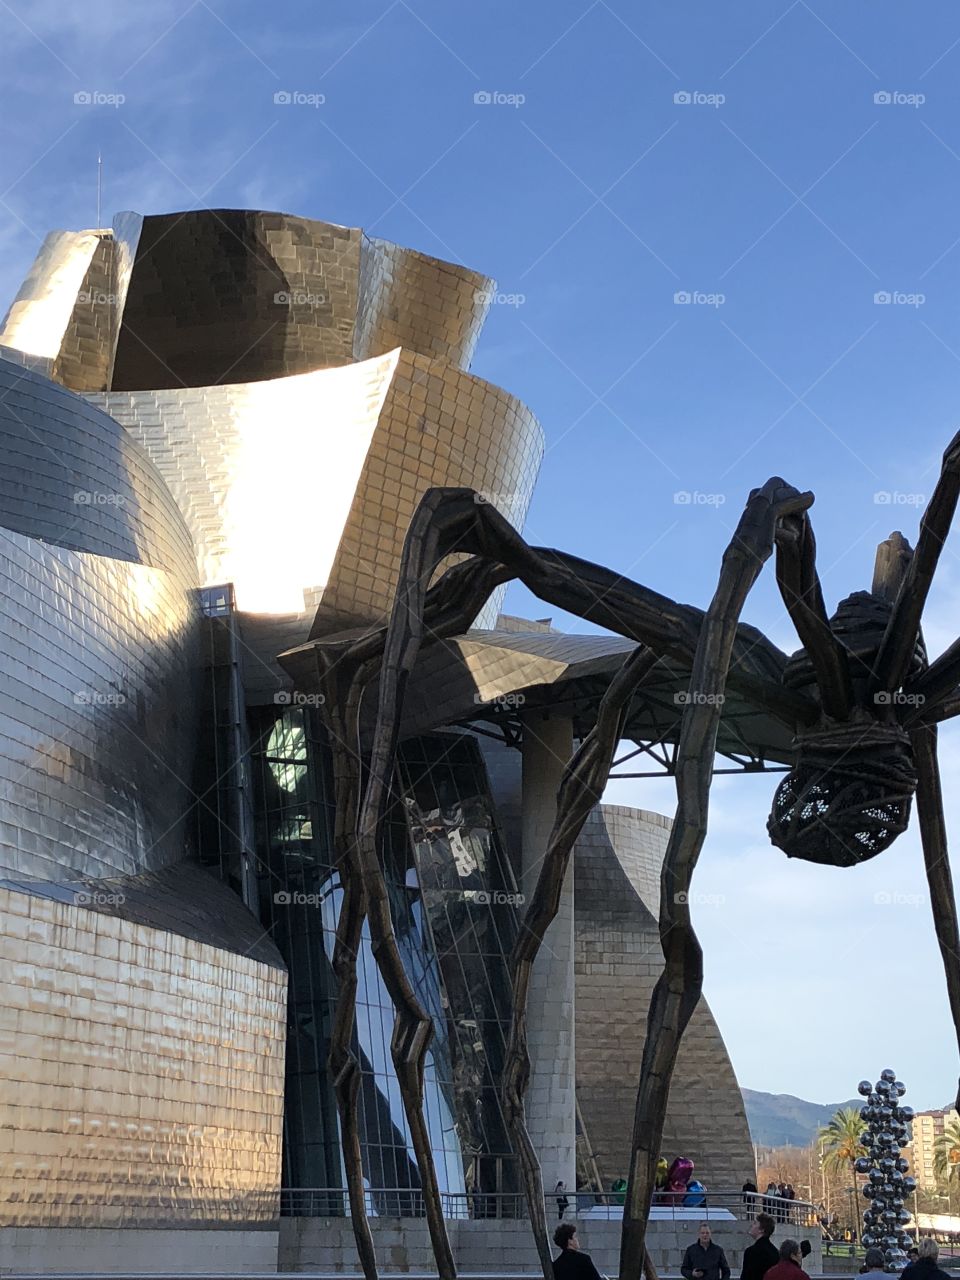 Guggenheim museum in Bilbao, Spain, a lovely January day. Also in view is the spider sculpture ”Maman”. 